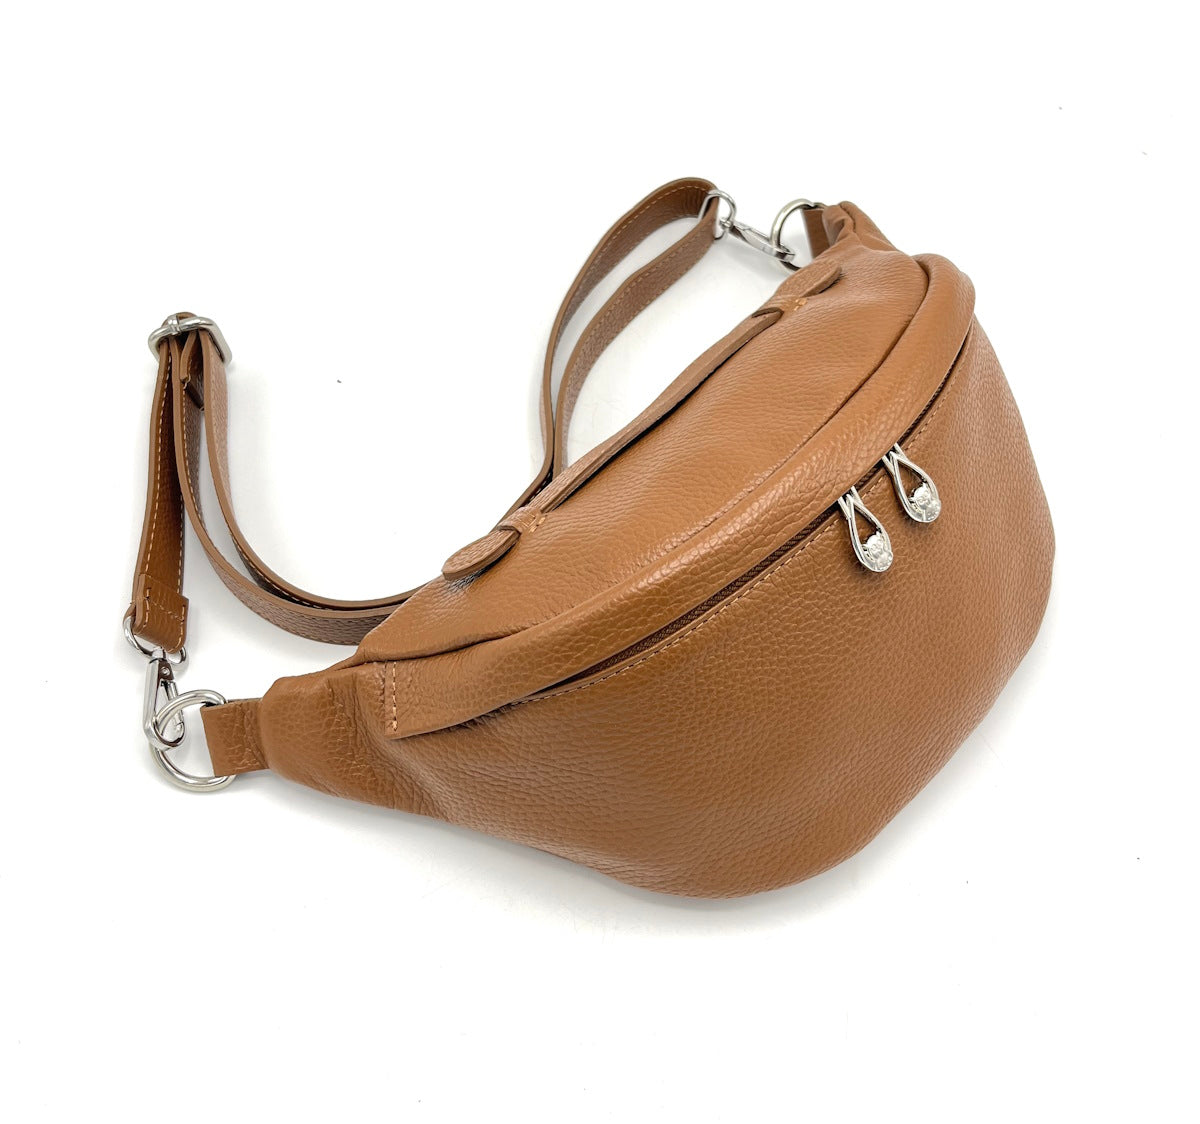 Genuine leather crossbody bag, for women, made in Italy, art. 112426